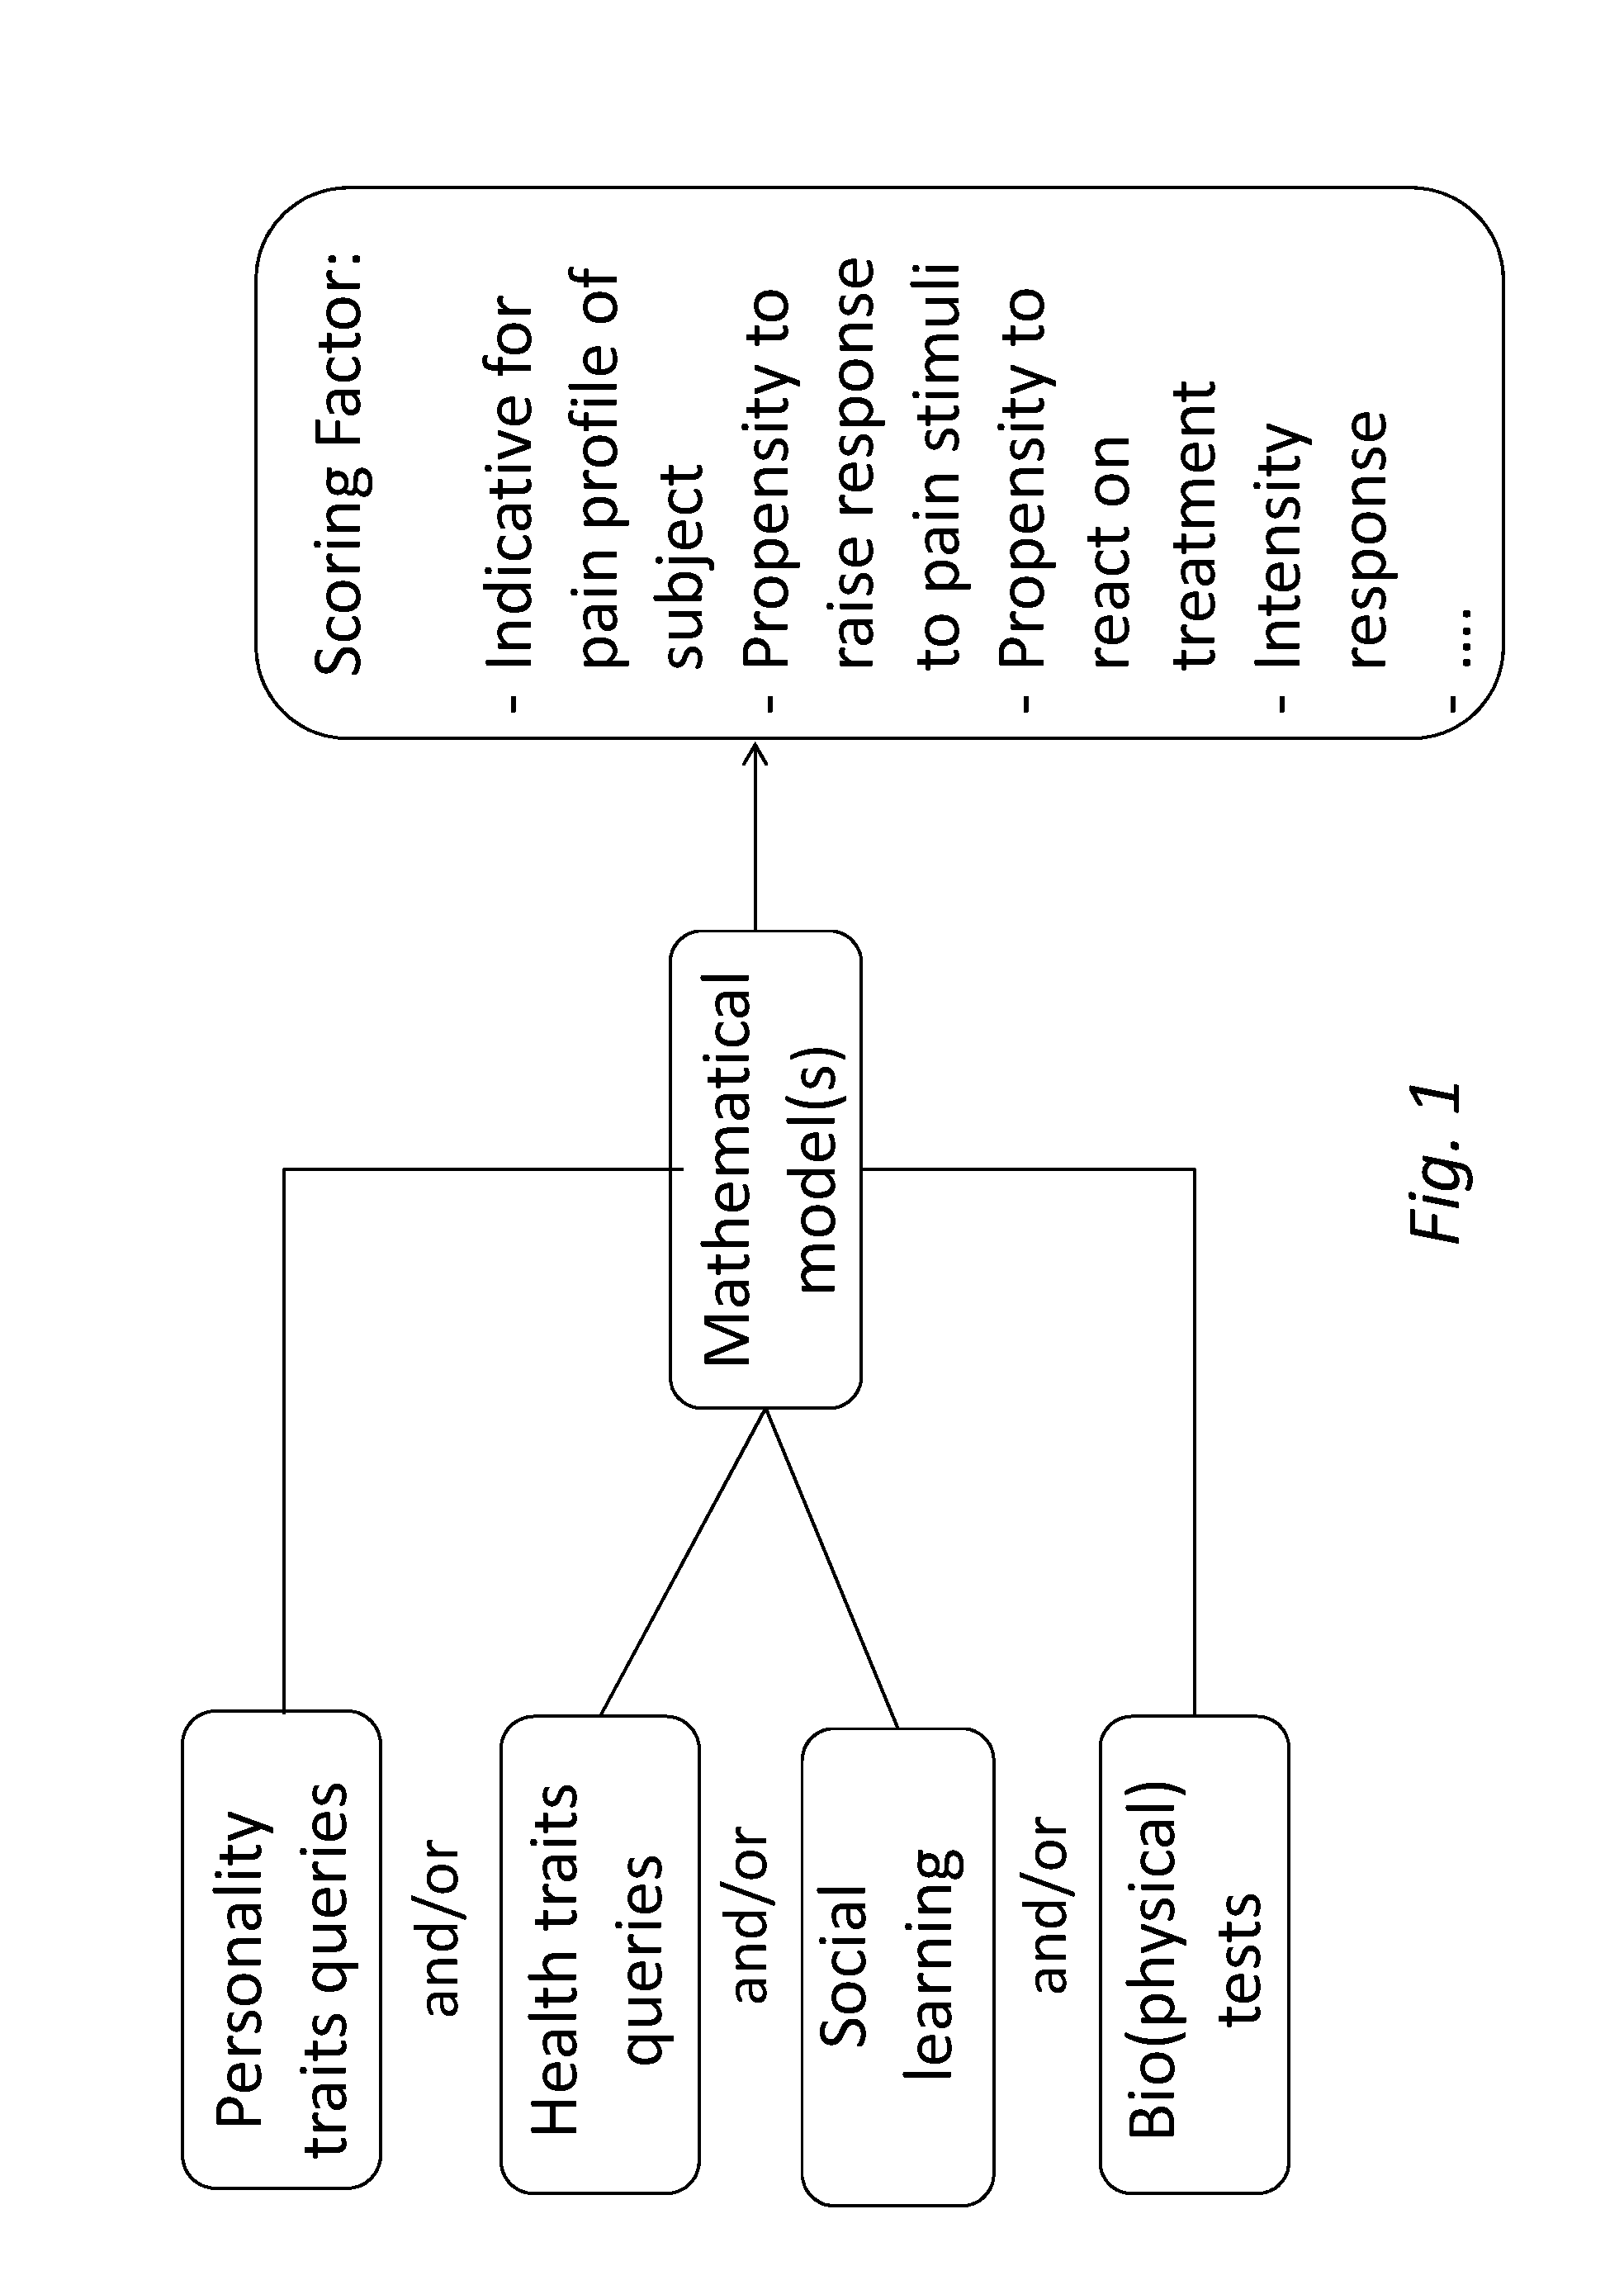 Method and tools for predicting a pain response in a subject suffering from cancer-induced bone pain